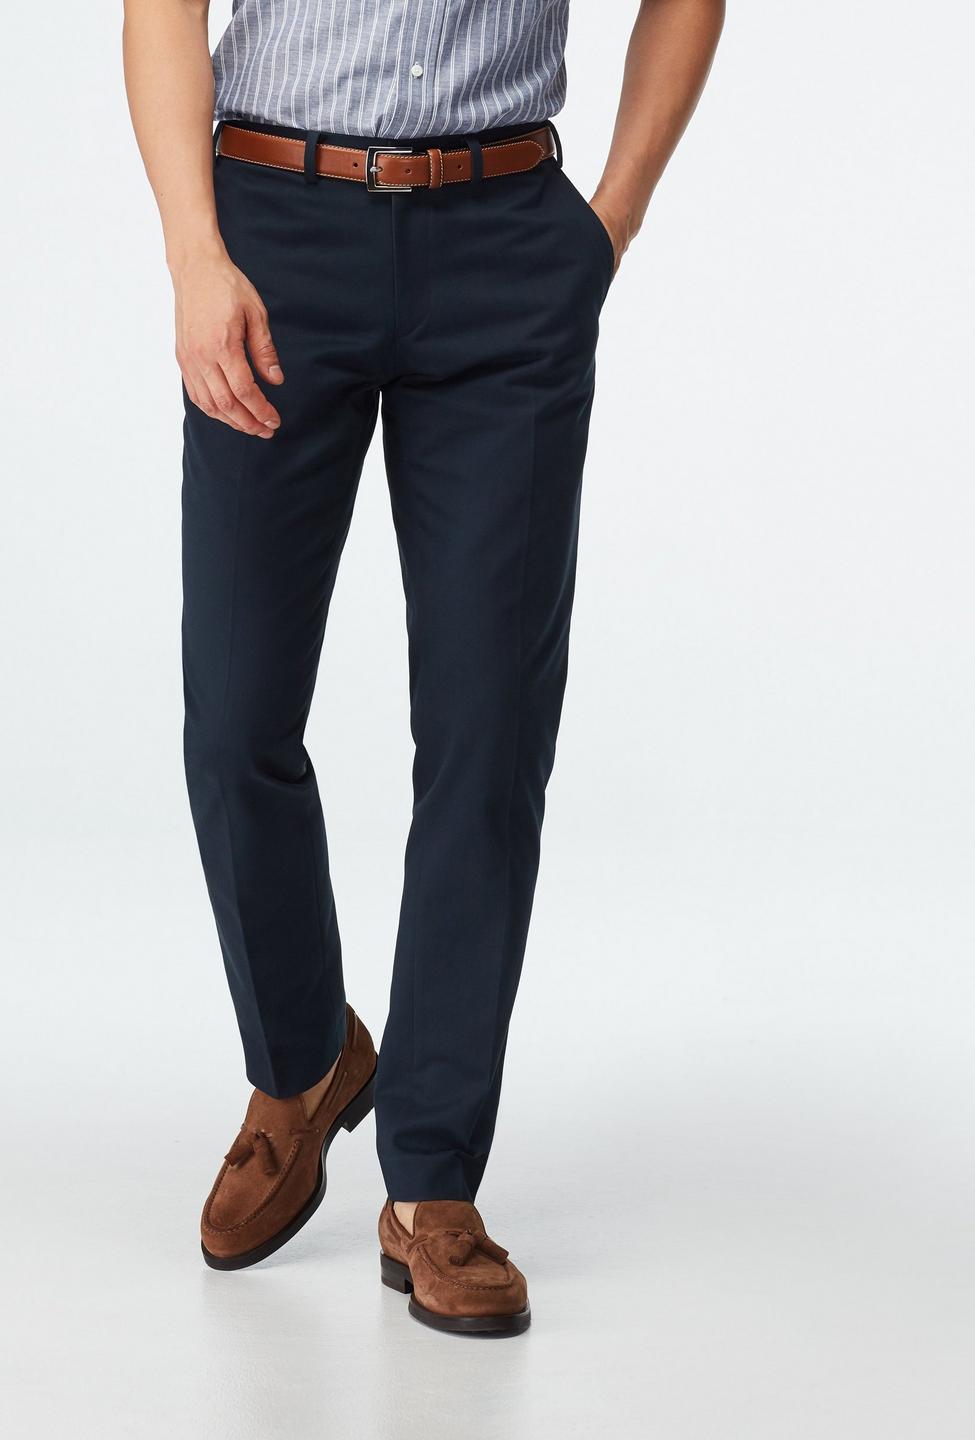 Navy pants - Halton Solid Design from Premium Indochino Collection